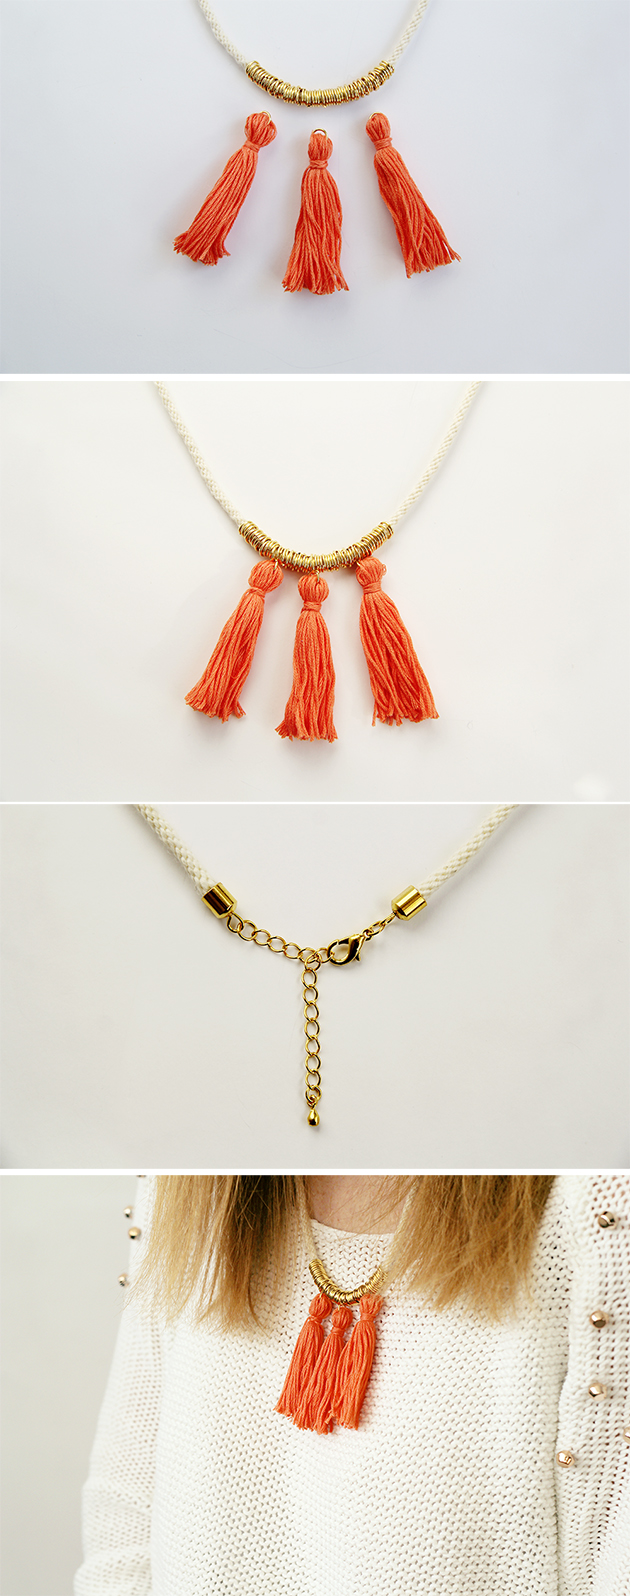 How to Make DIY Tassels for Jewelry from Wire and Cotton by Denise